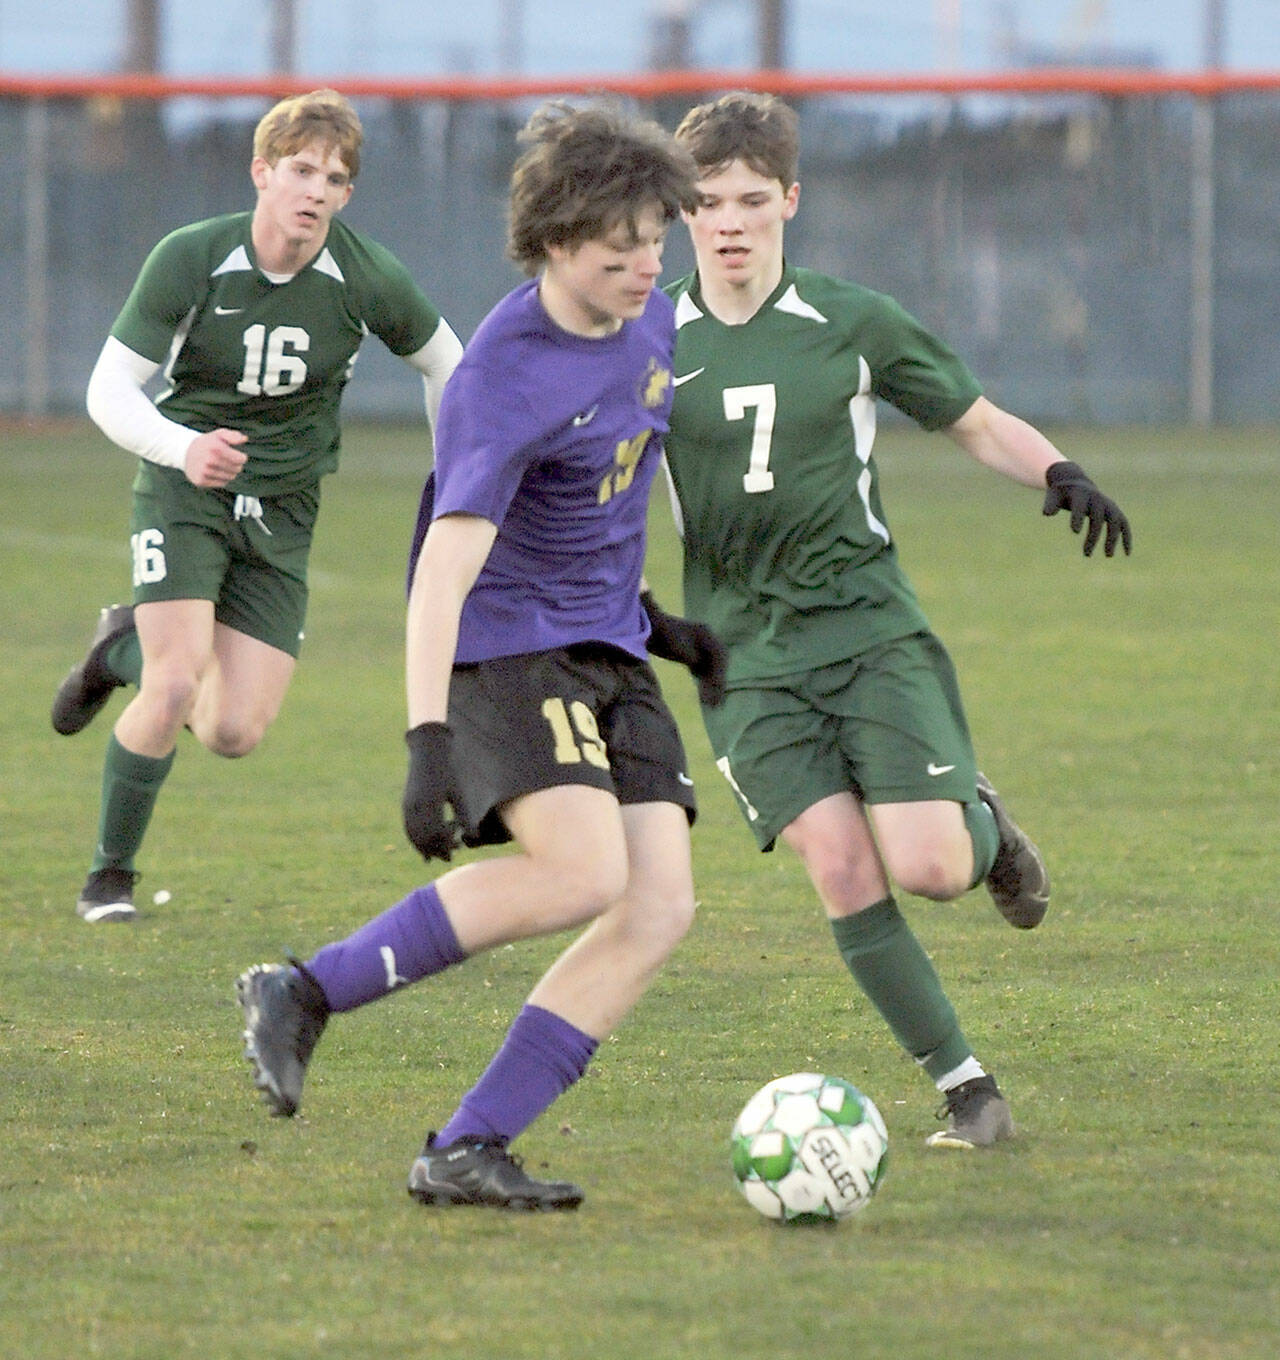 KEITH THORPE/PENINSULA DAILY NEWS Sequim’s Finn Braaten, center, looks for a way past Port Angeles’ Kaleb Gagnon, right, as teammate Zak Alton comes up from behind on Thursday night in Port Angeles.